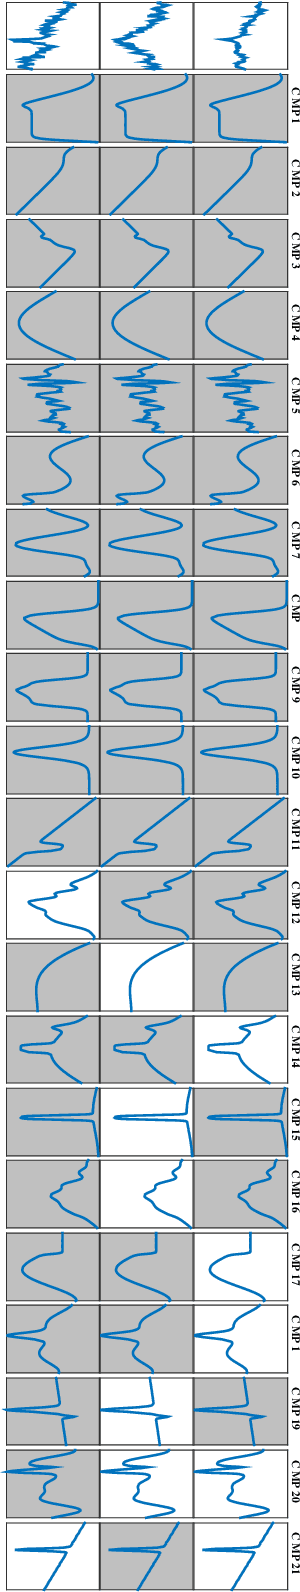 Figure 3 for Discovering Relational Covariance Structures for Explaining Multiple Time Series